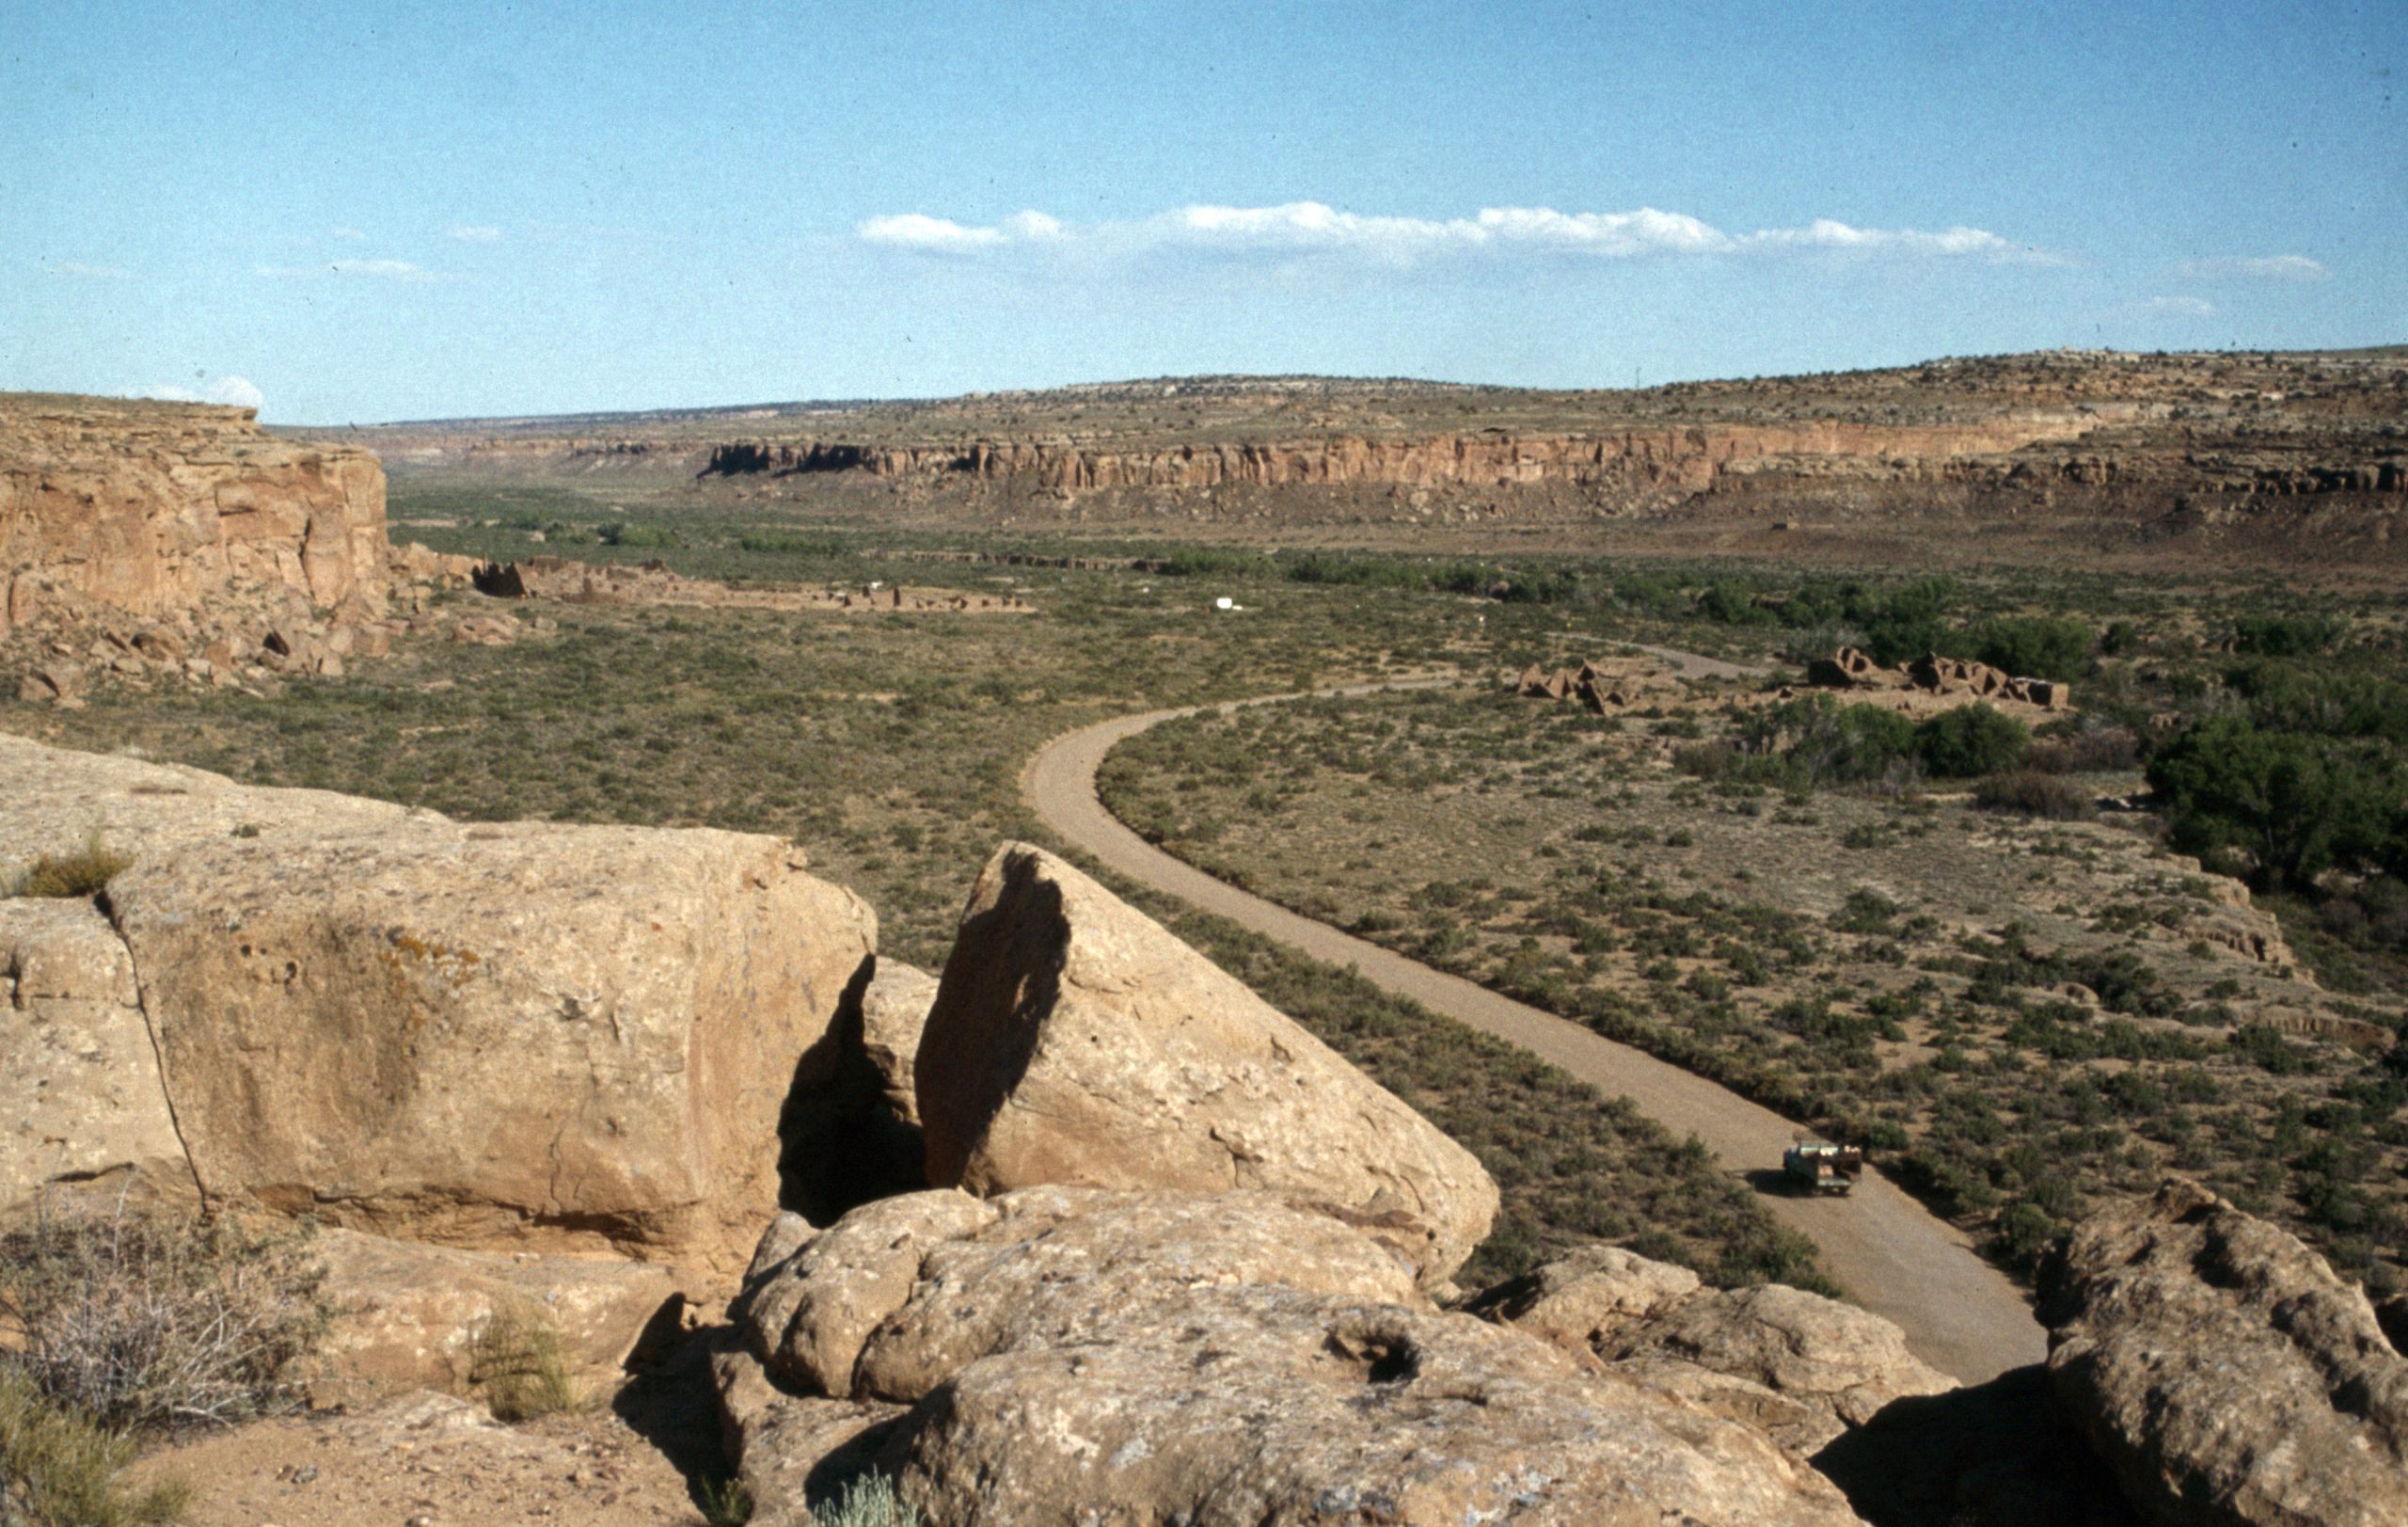 Indigenous Leaders Hail Biden’s Proposed Chaco Canyon Drilling Ban as ‘Important First Step’